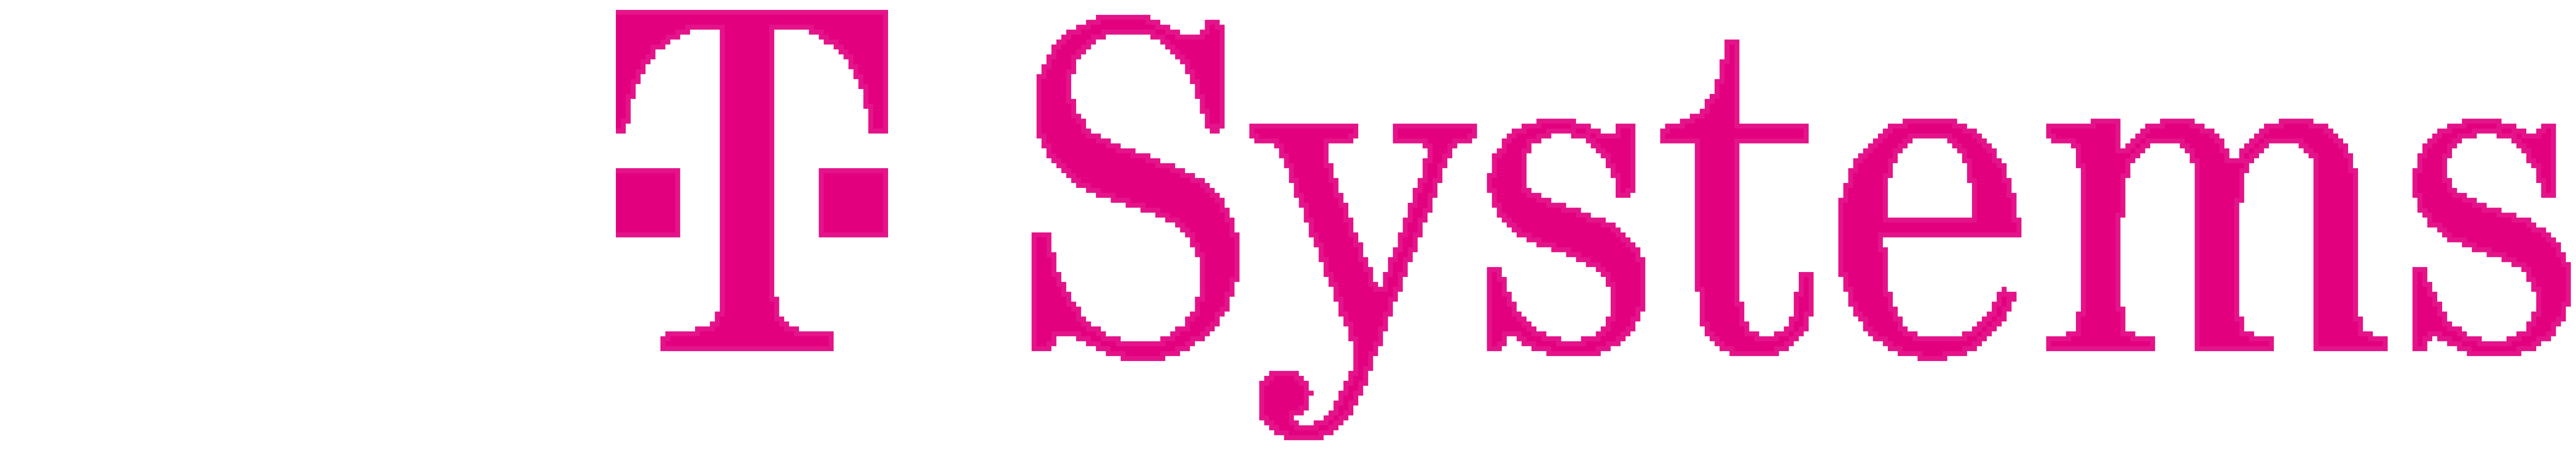 logo T Systems